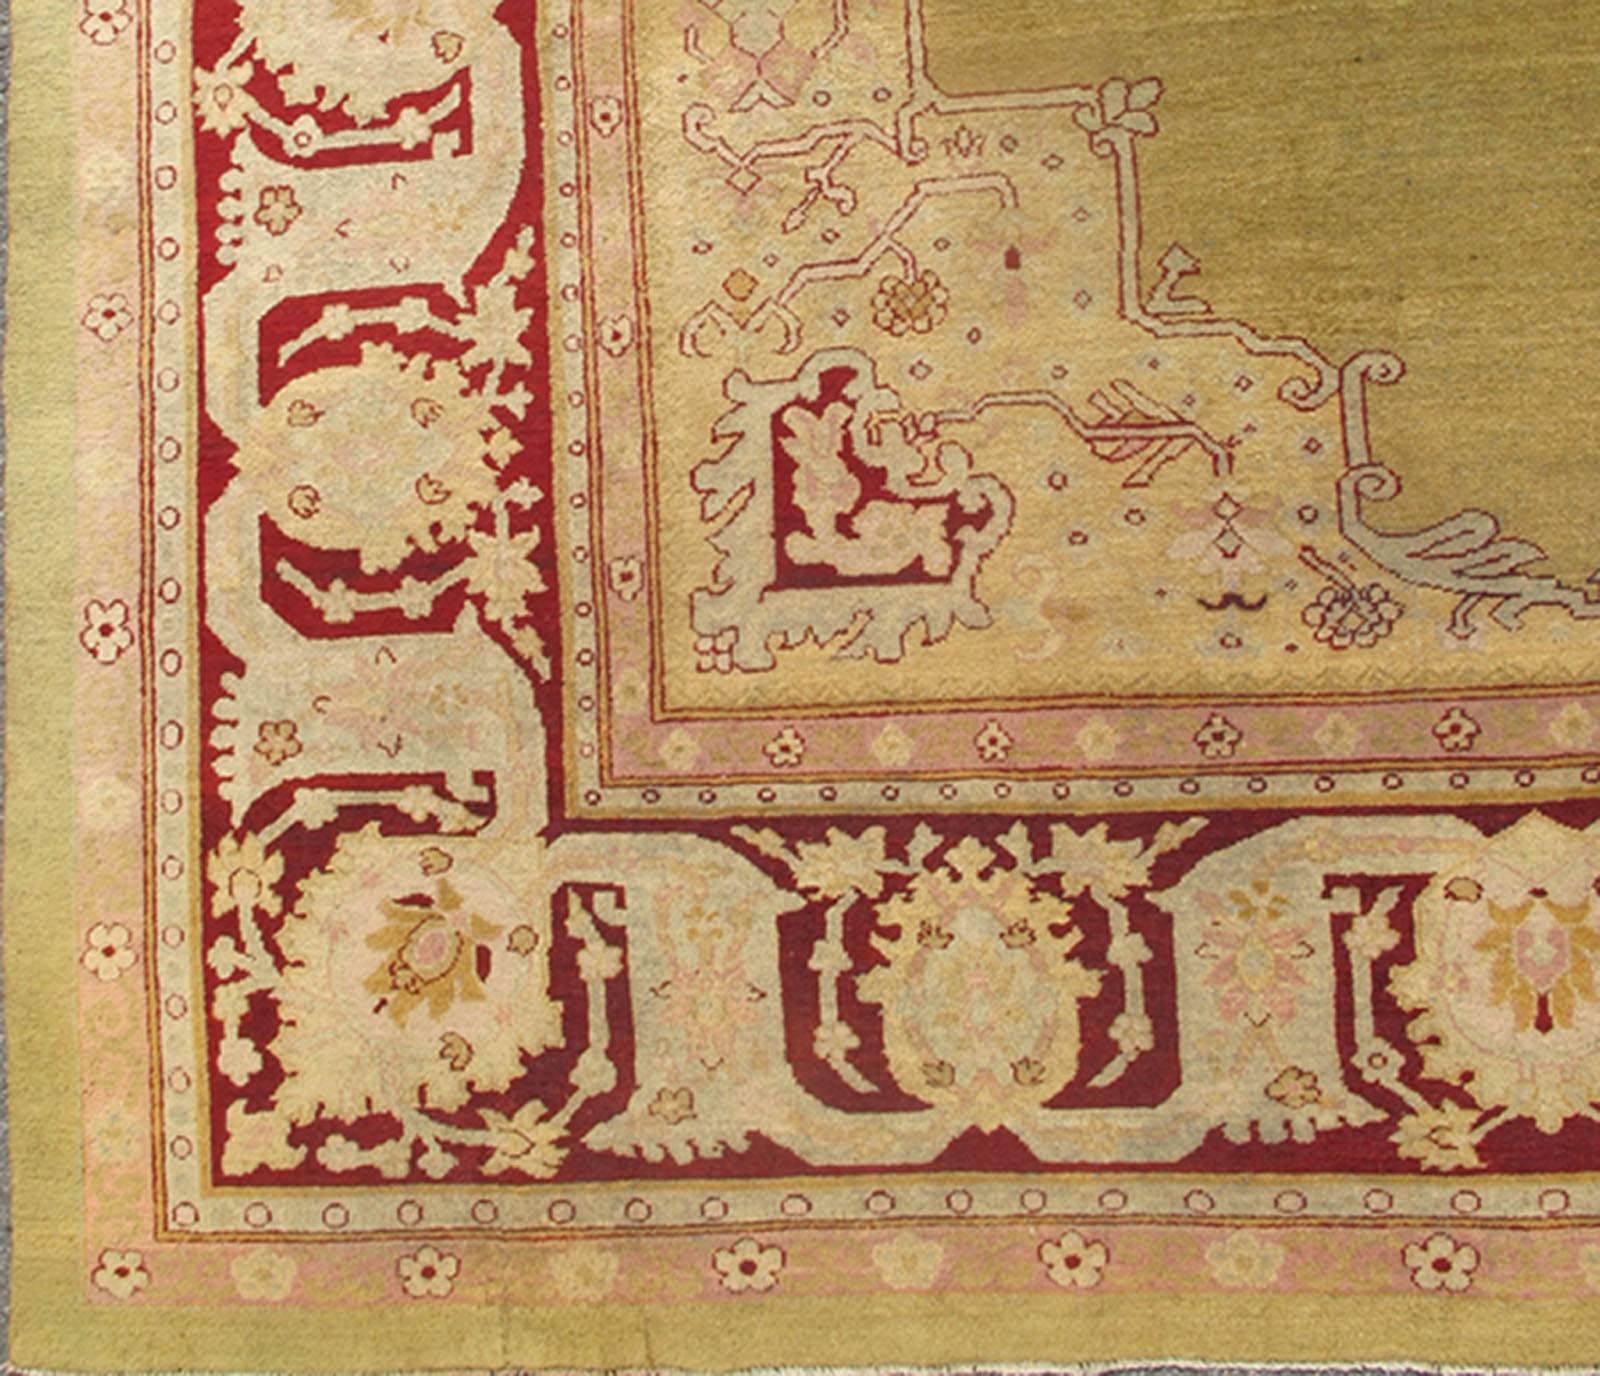 Large Antique Green Background Indian Amritsar Carpet with Red Border. Keivan Woven Arts / rug / 13-0706 / 1920 circa Early 20th Century. / Antique Amritsar, Antique Agra.
Measures: 13'2 x 18'0.
This carpet was woven in Amritsar in the late 19th